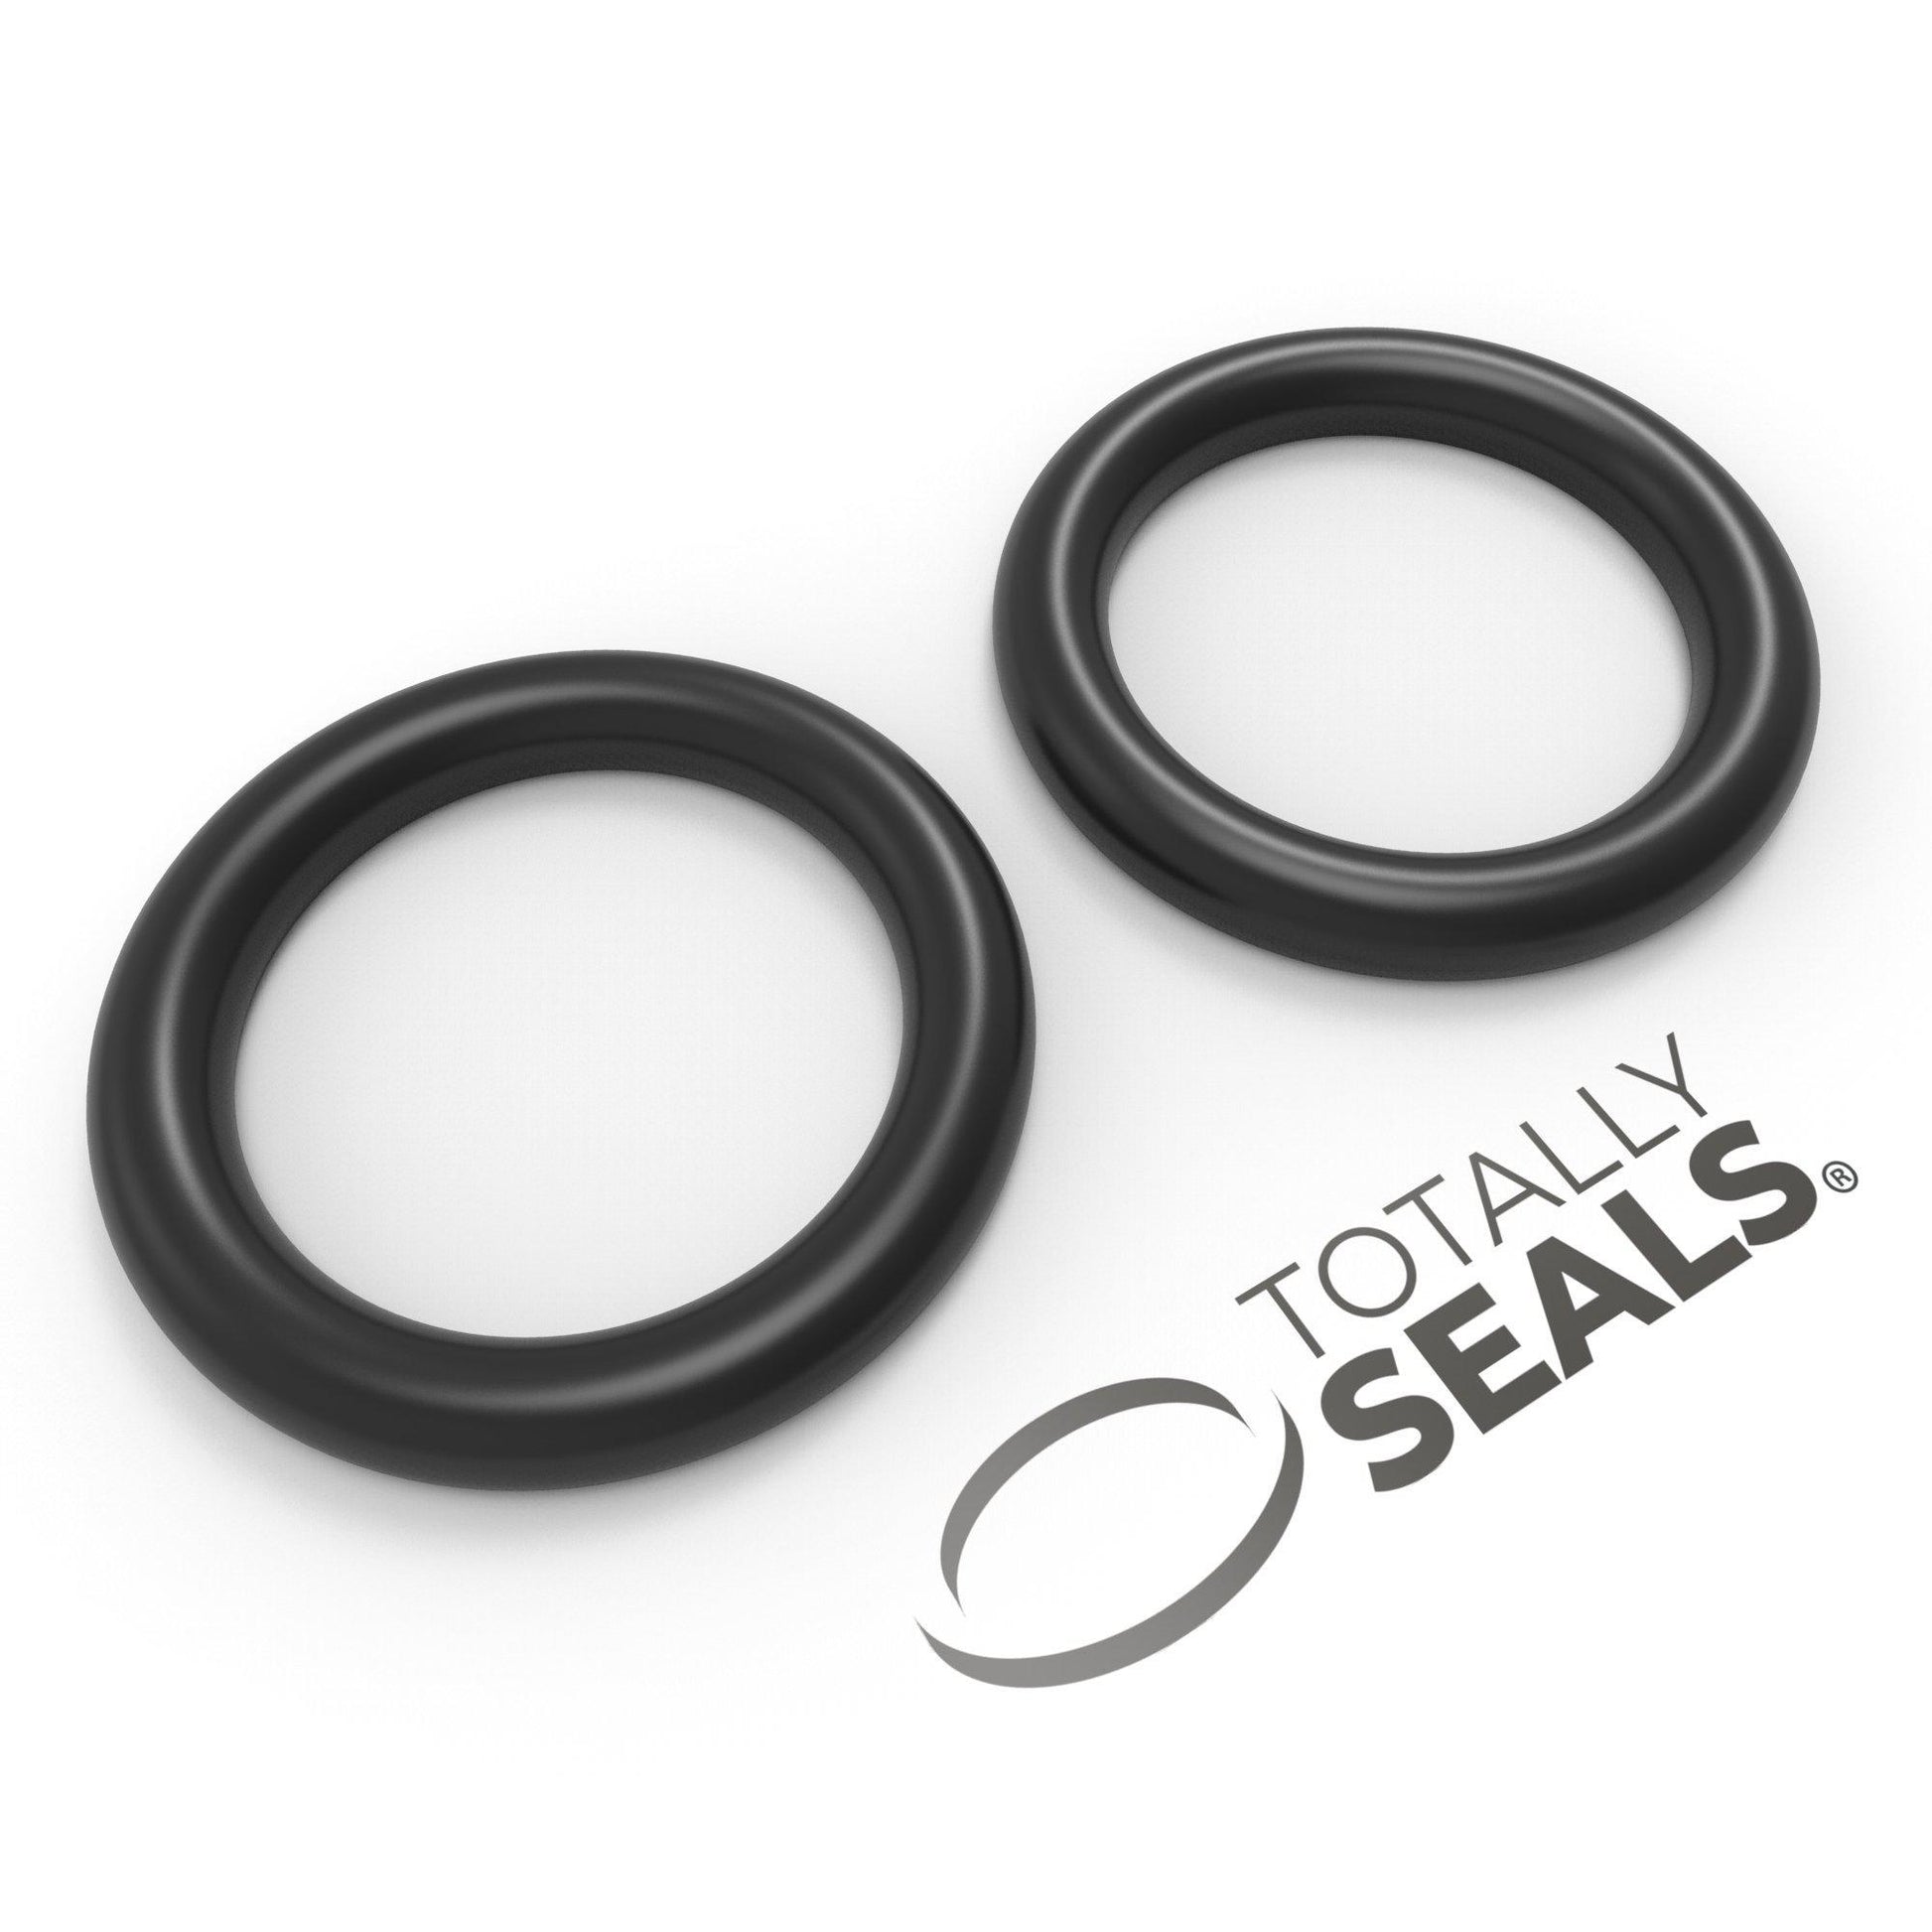 40mm x 1.5mm (43mm OD) Nitrile O-Rings - Totally Seals®